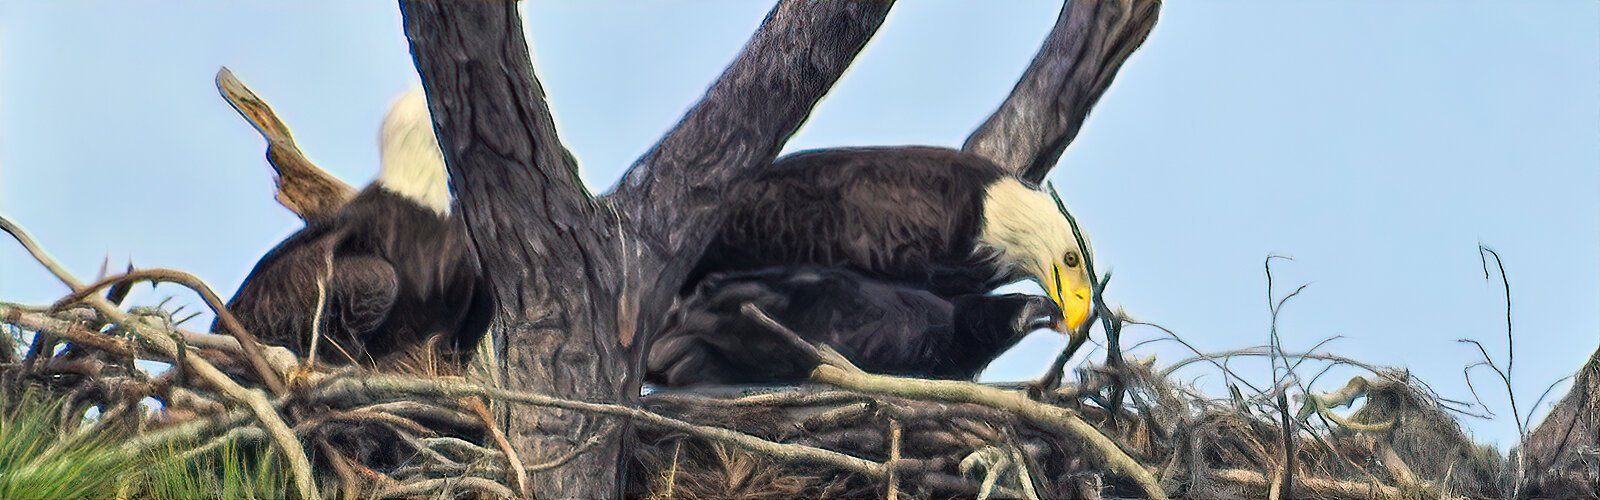 A bald eagle mom feeds her eaglet in the nest. The largest recorded nest, found near St Petersburg, was 9 -ft-wide, 20-ft-deep and weighed over two tons. For more information on the Audubon EagleWatch program visit cbop.audubon.org.